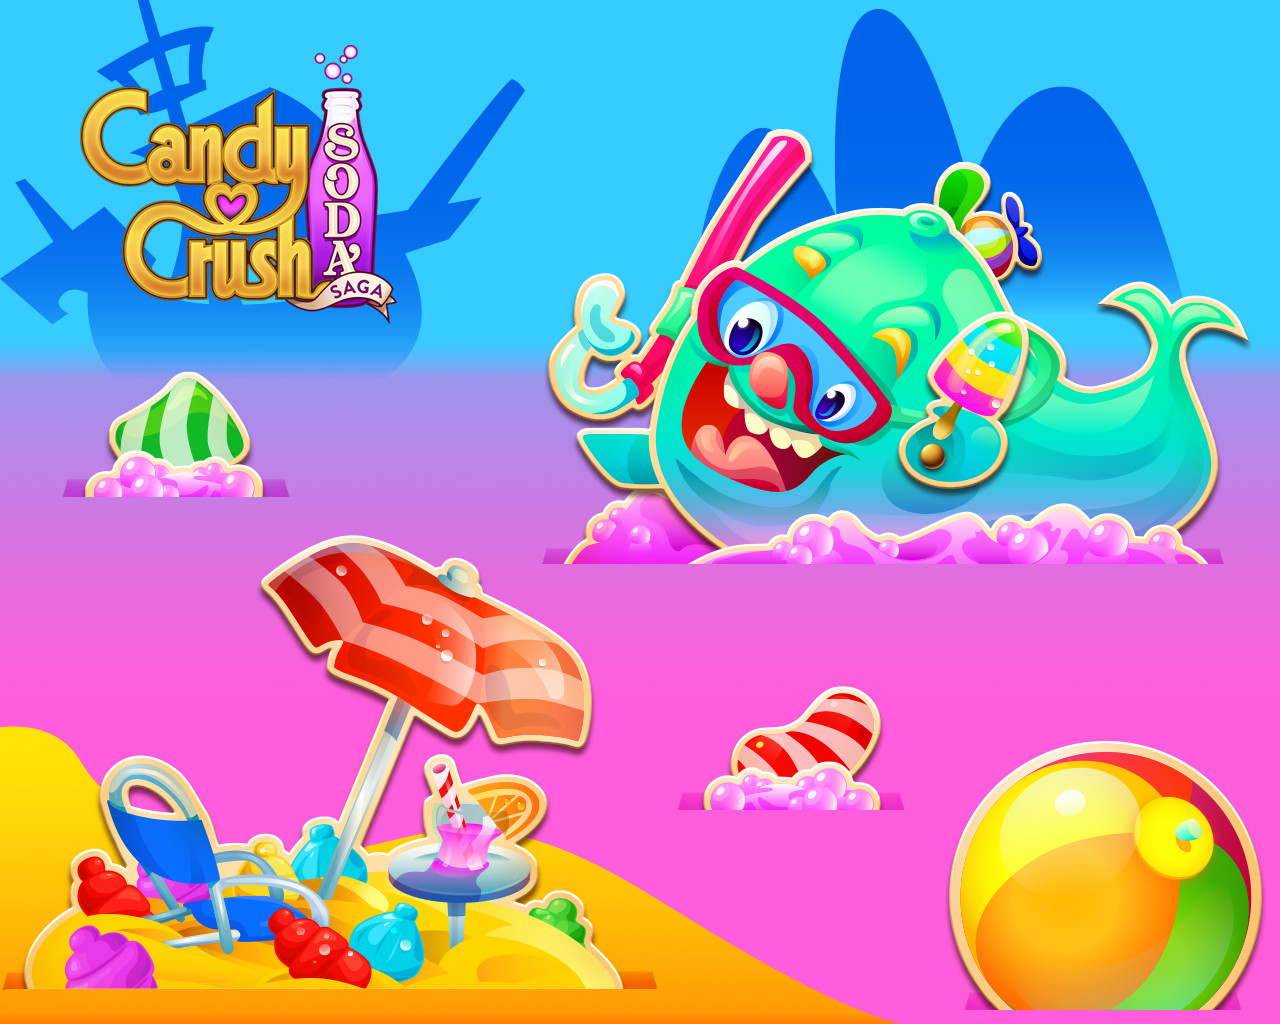 Caspar Swahn - Candy Crush Soda Saga Characters, Assets and Backgrounds